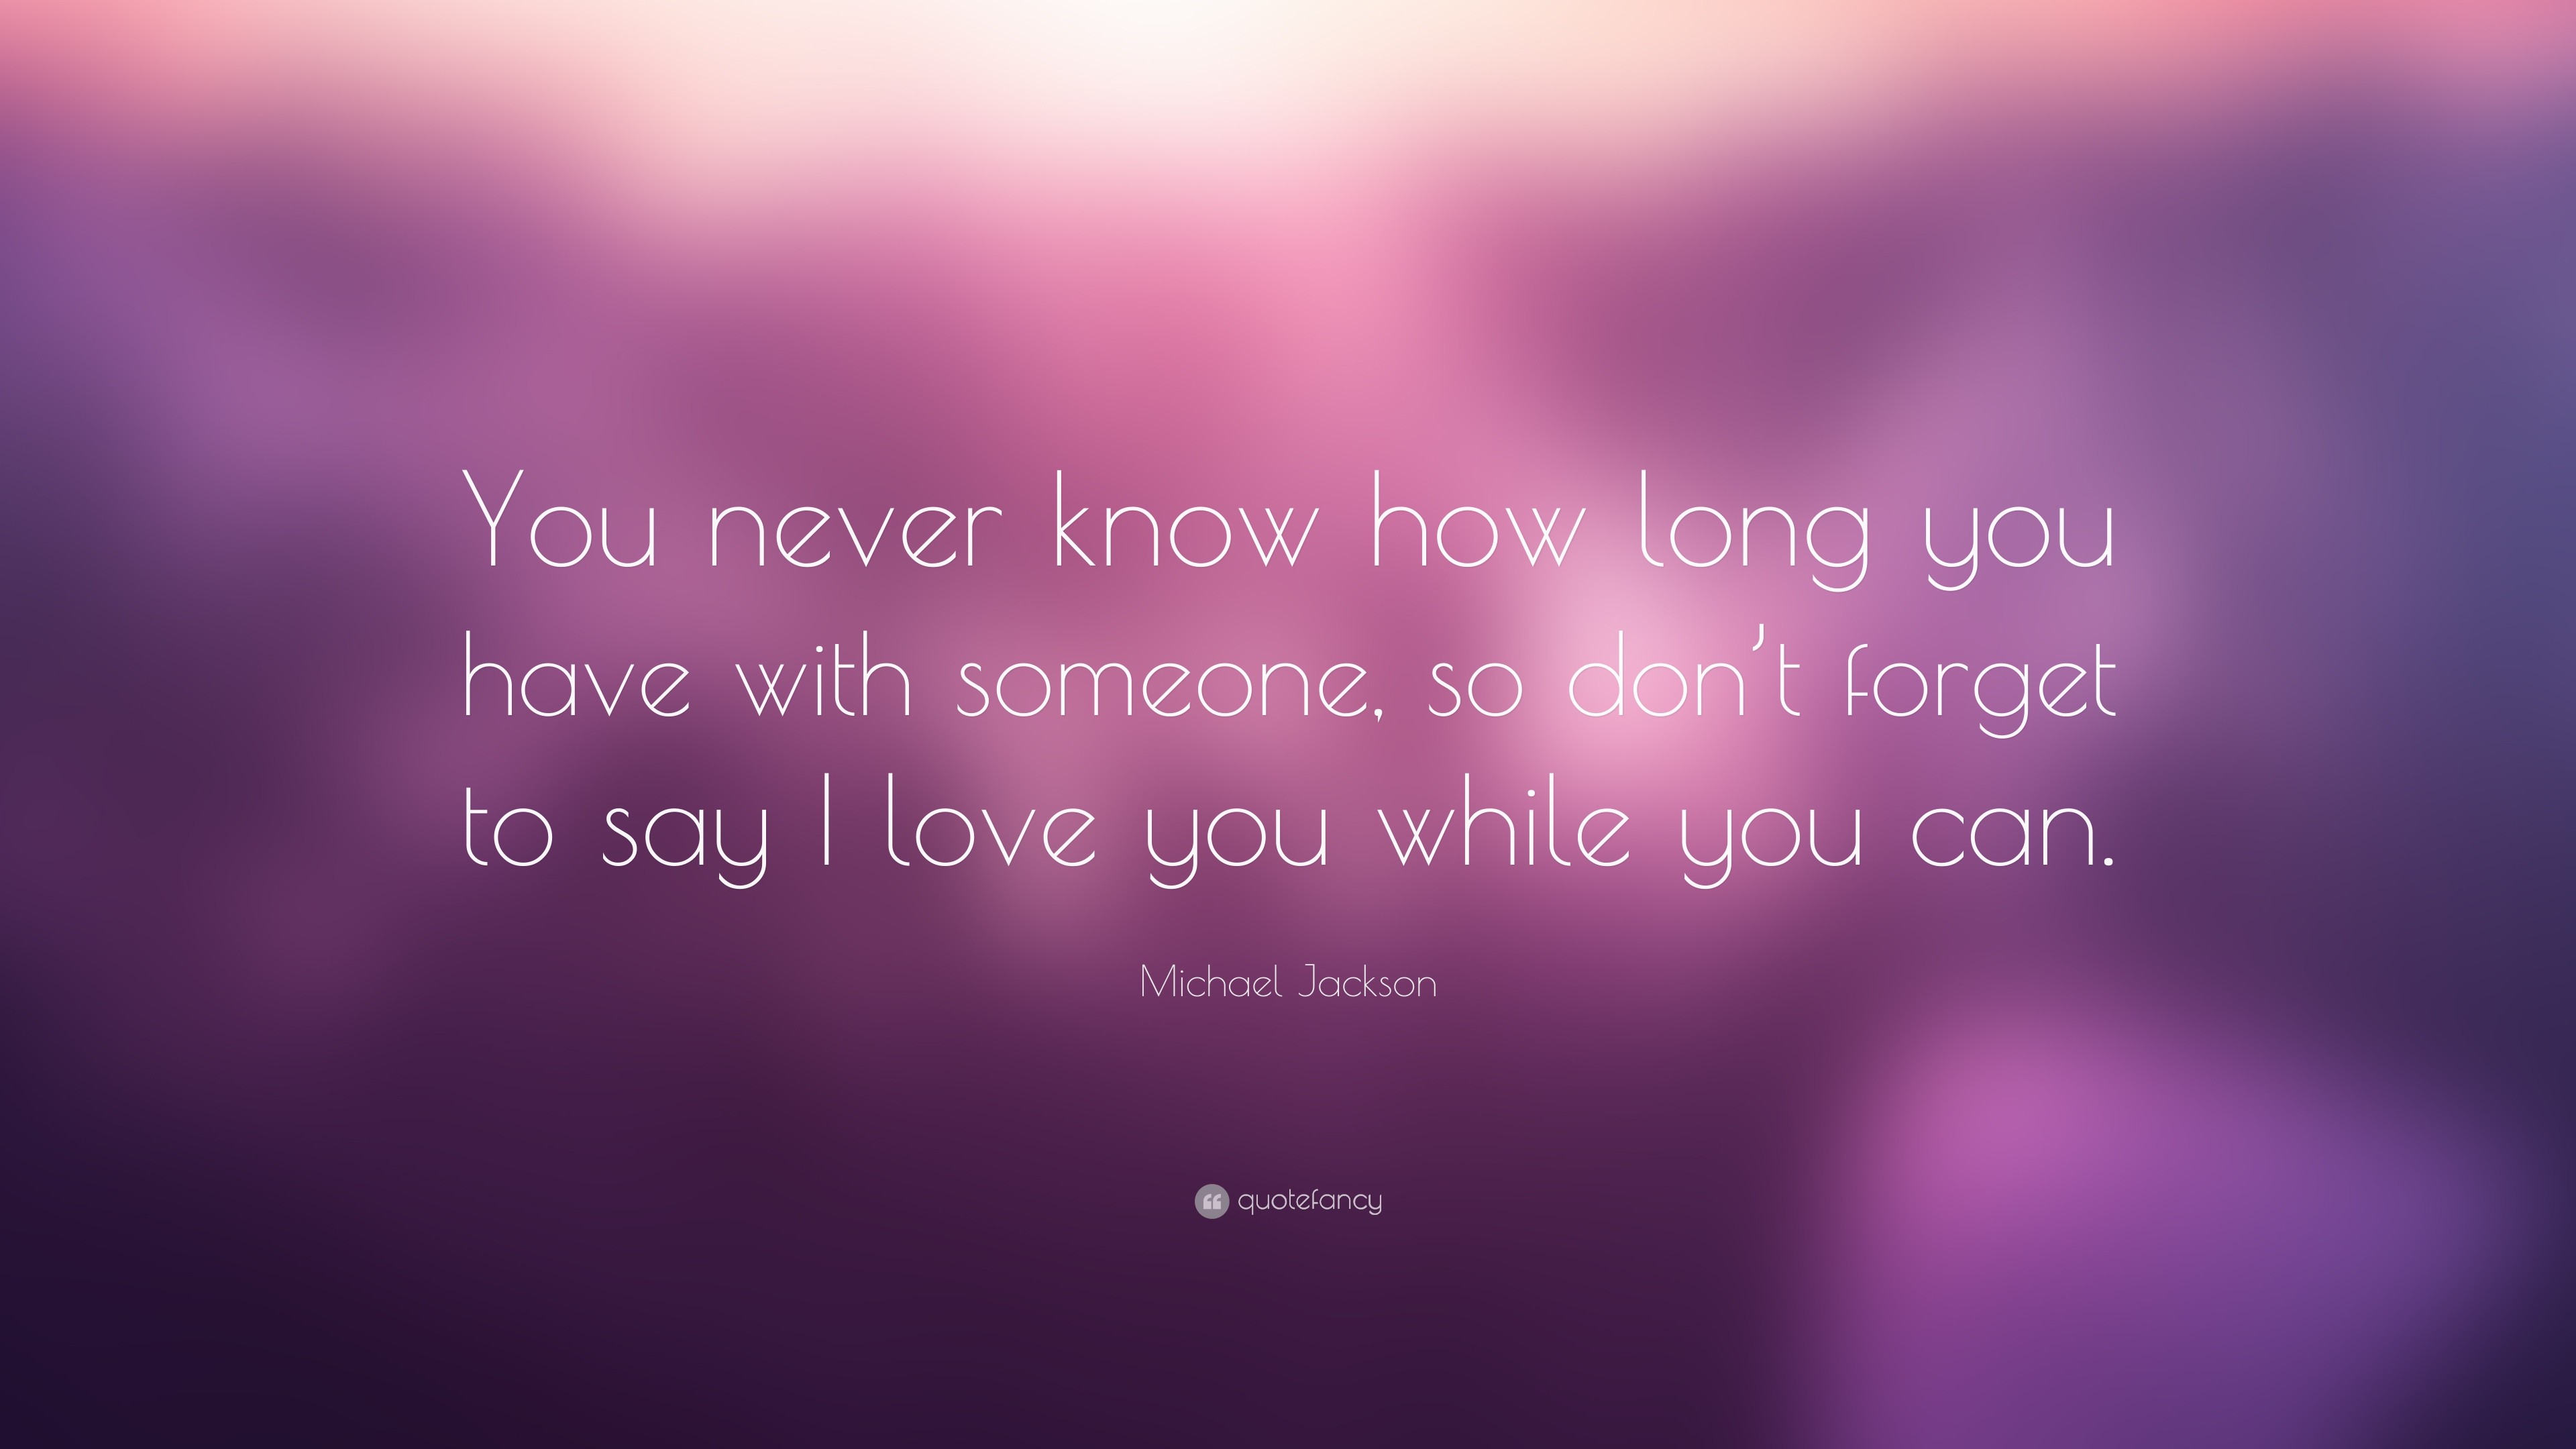 3840x2160 Michael Jackson Quote: “You never know how long you have with someone, so